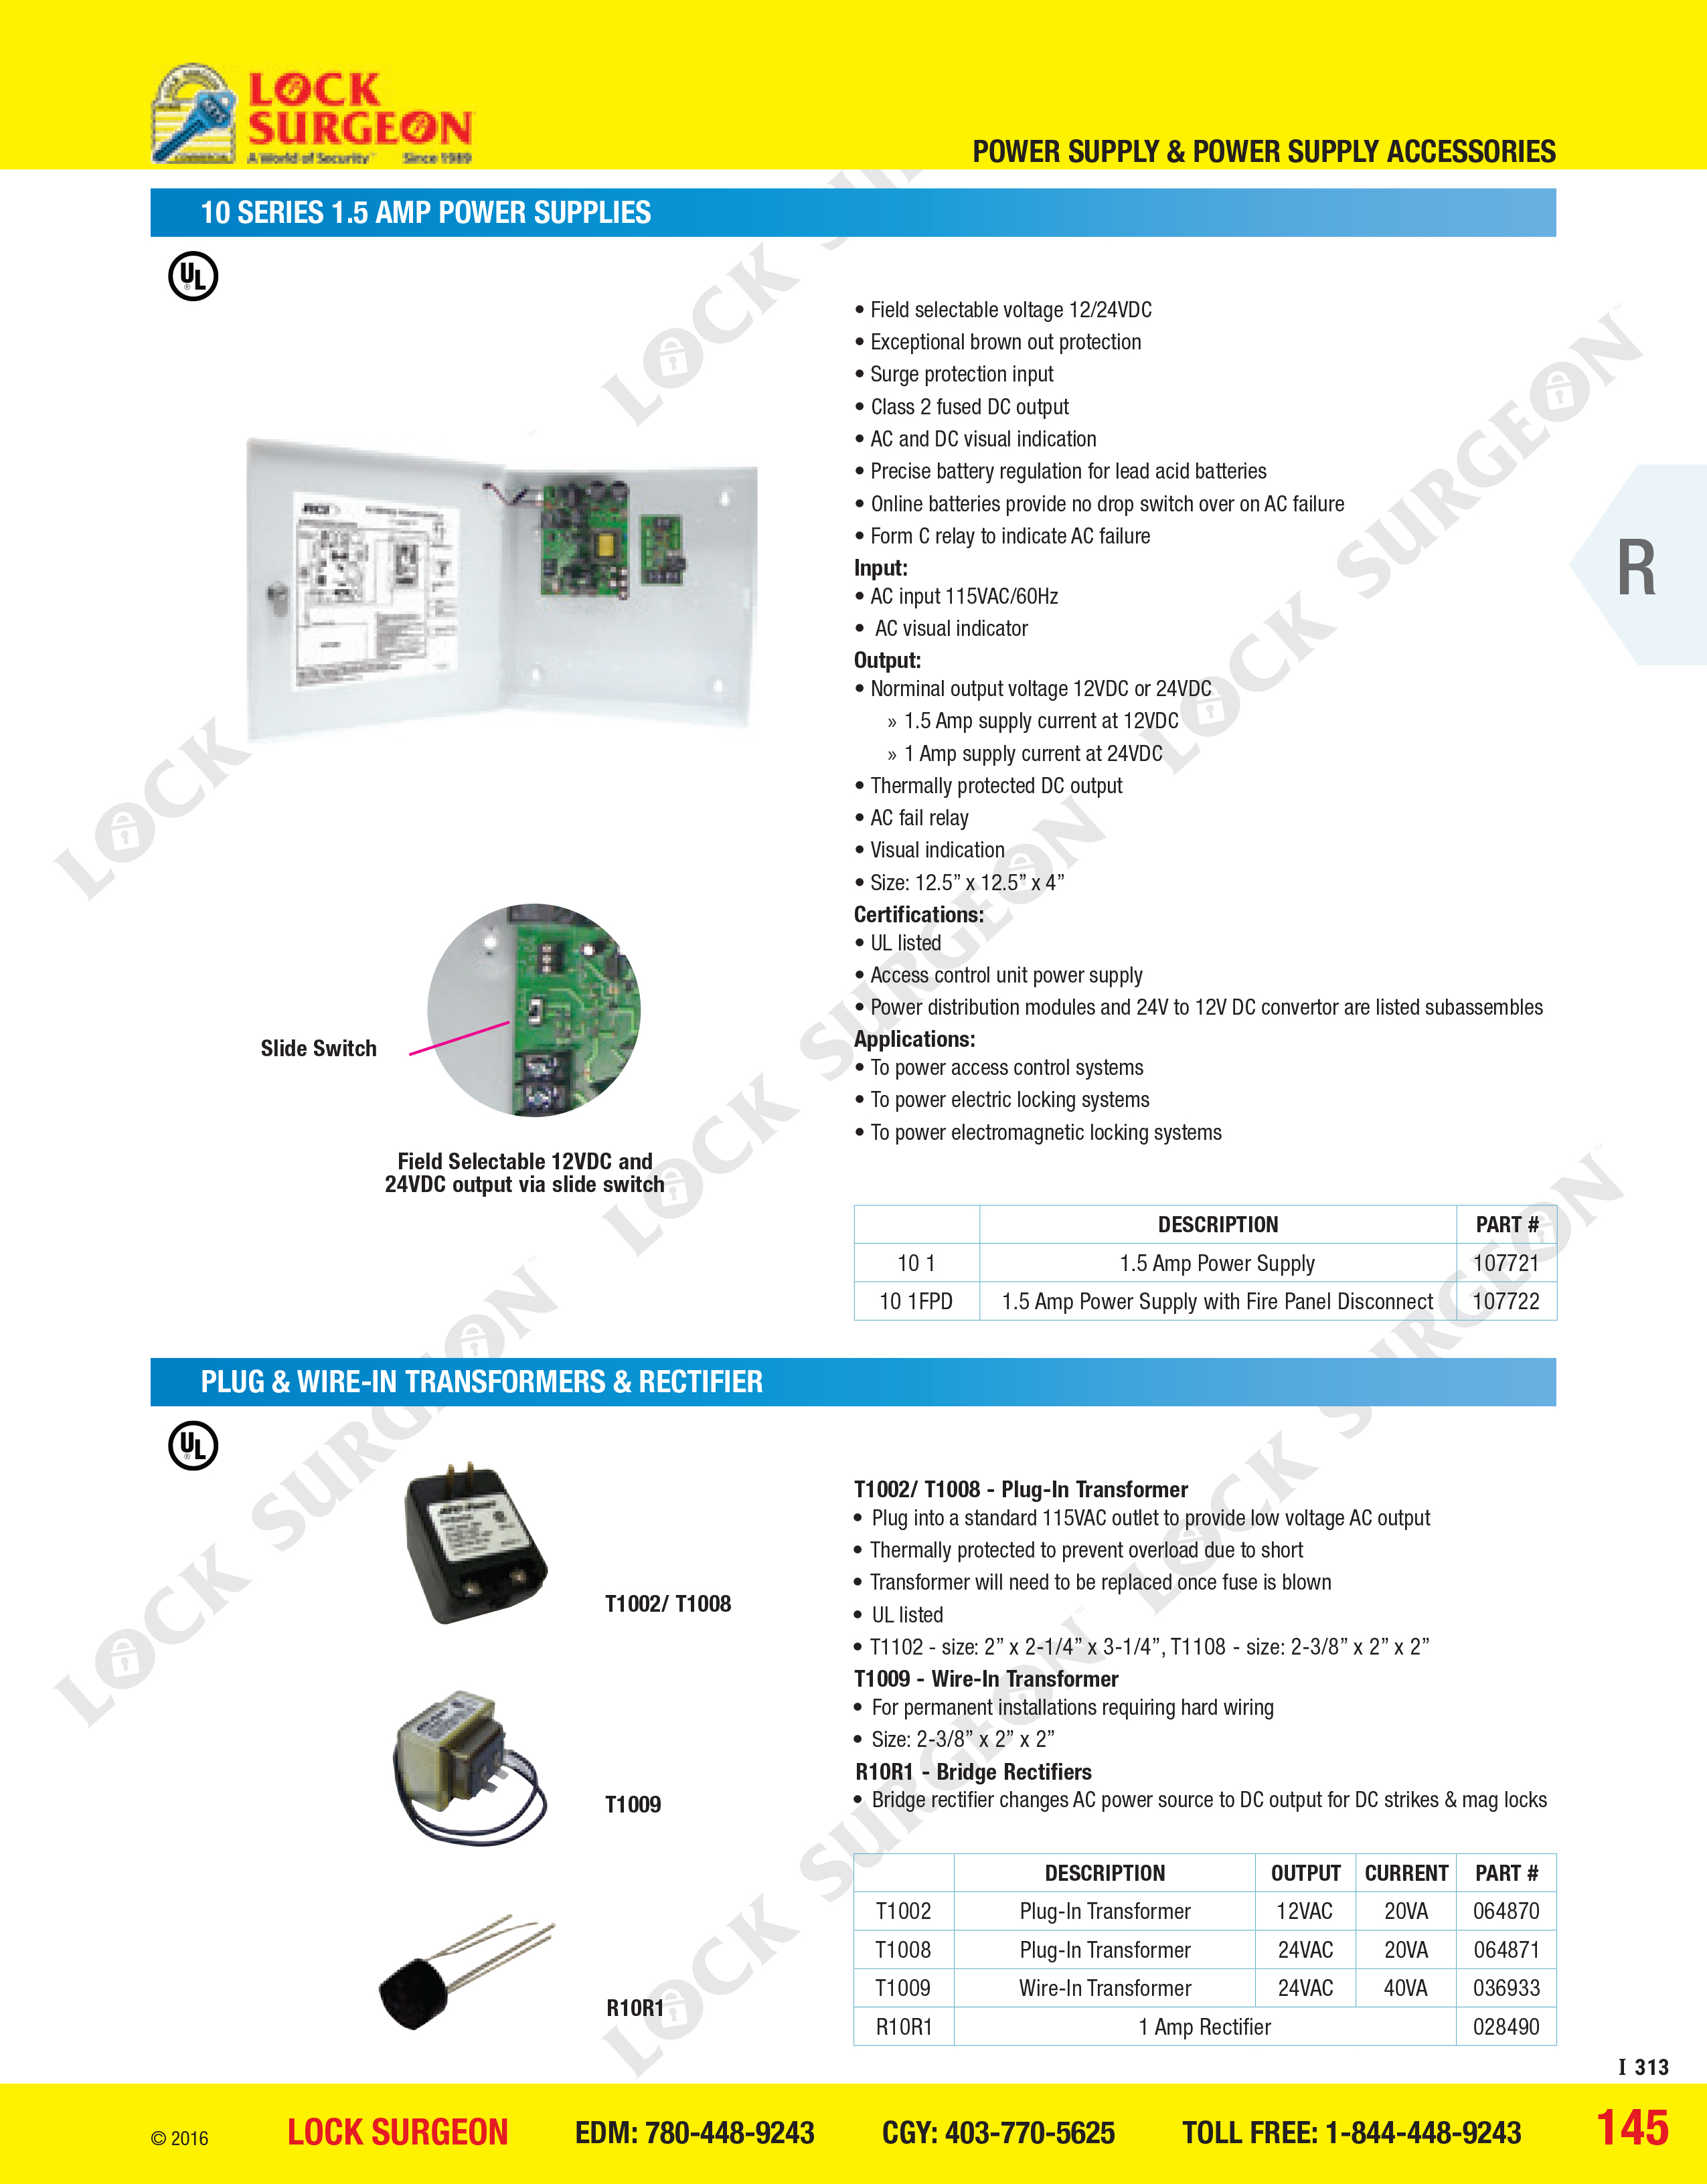 10 Series 1.5 AMP power supplies and accessories, plug, wire-in transformers, rectifier Acheson.